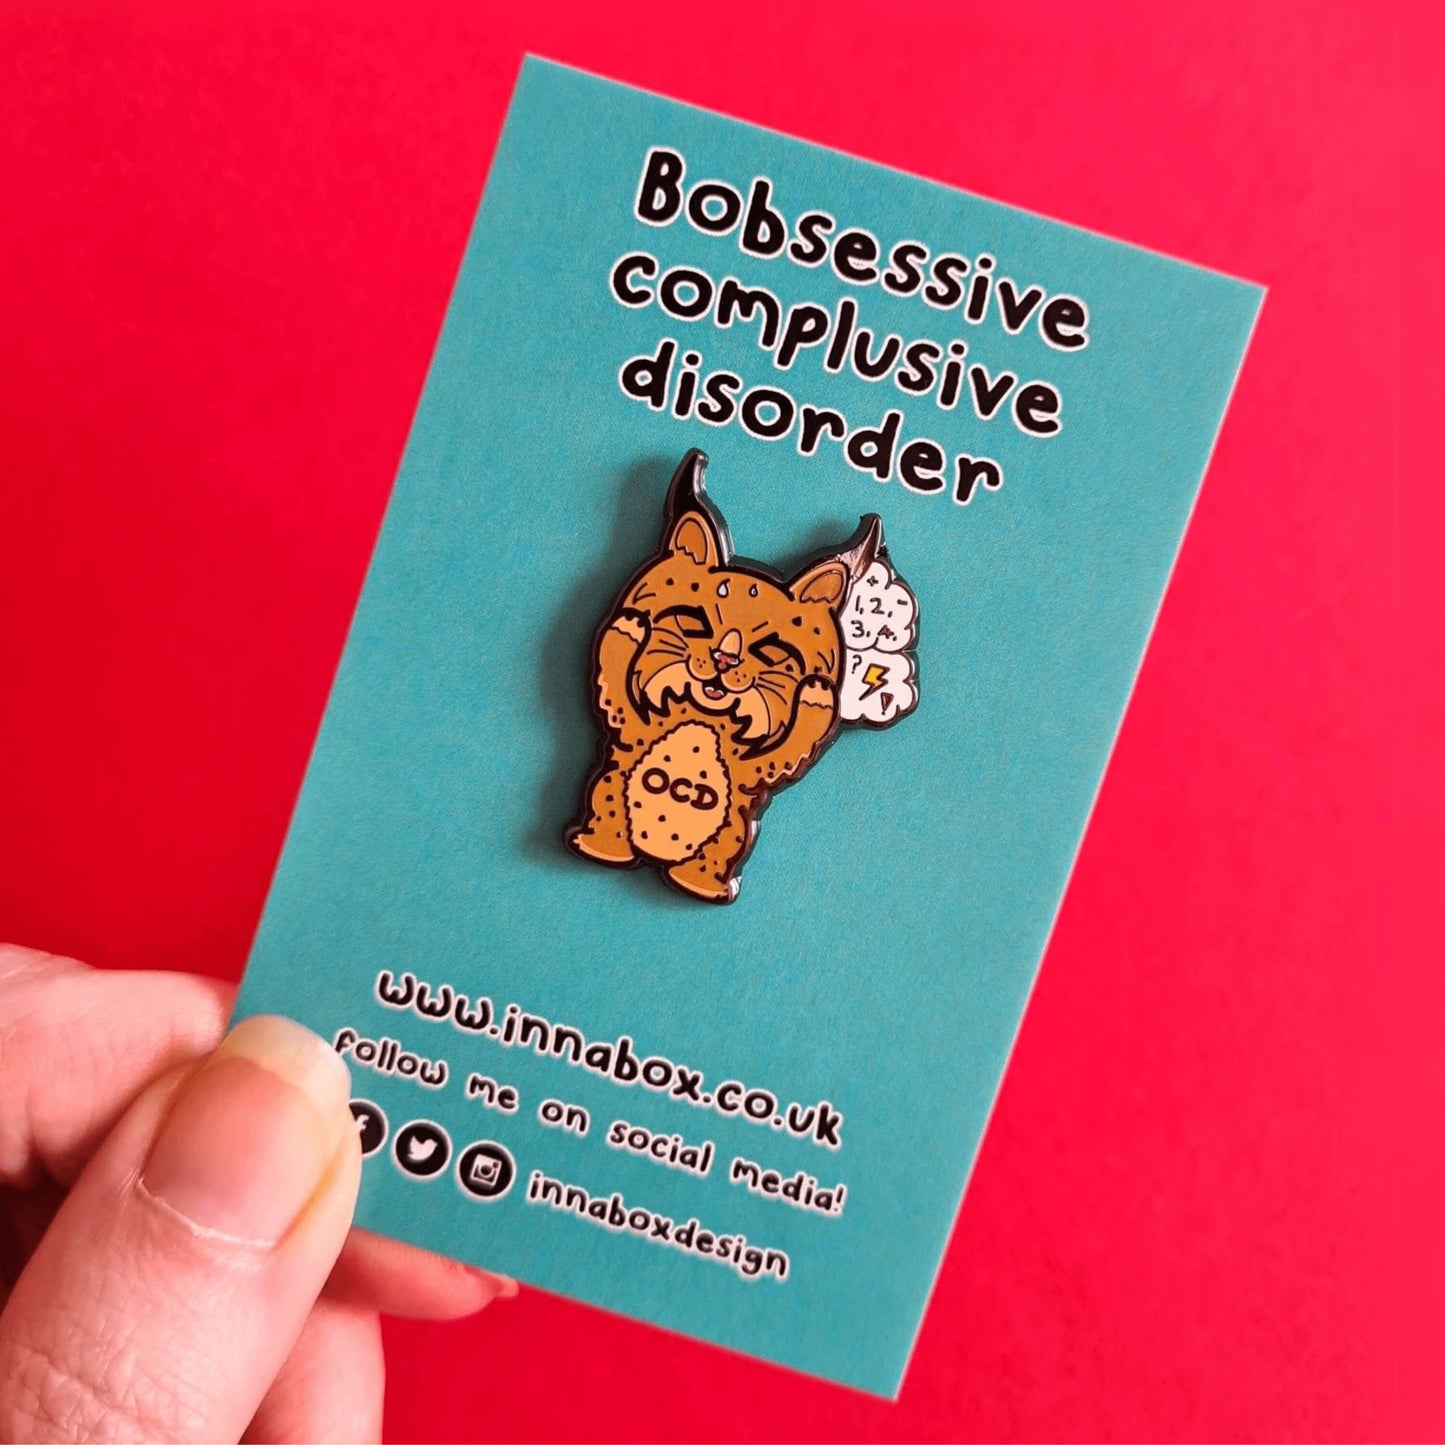 Bobsessive Compulsive Disorder Enamel Pin - OCD on blue backing card with innabox social media info being held over a red background. The bobcat shape pin is brown with a stressed expression clutching its face with a thought bubble of numbers, question marks and lightning bolts. Across its tummy reads OCD. The pin was designed to raise awareness of obsessive compulsive disorder.